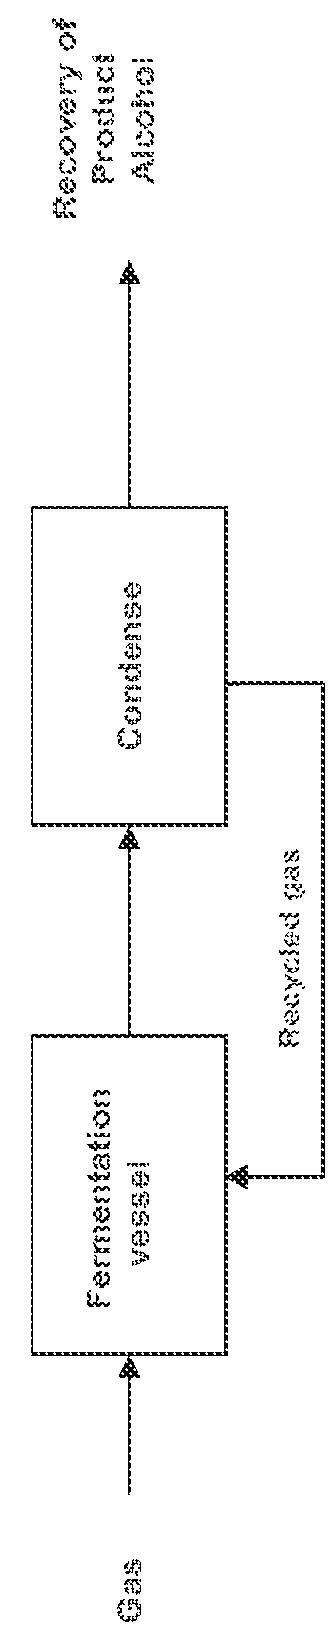 Process to remove product alcohols from fermentation broth